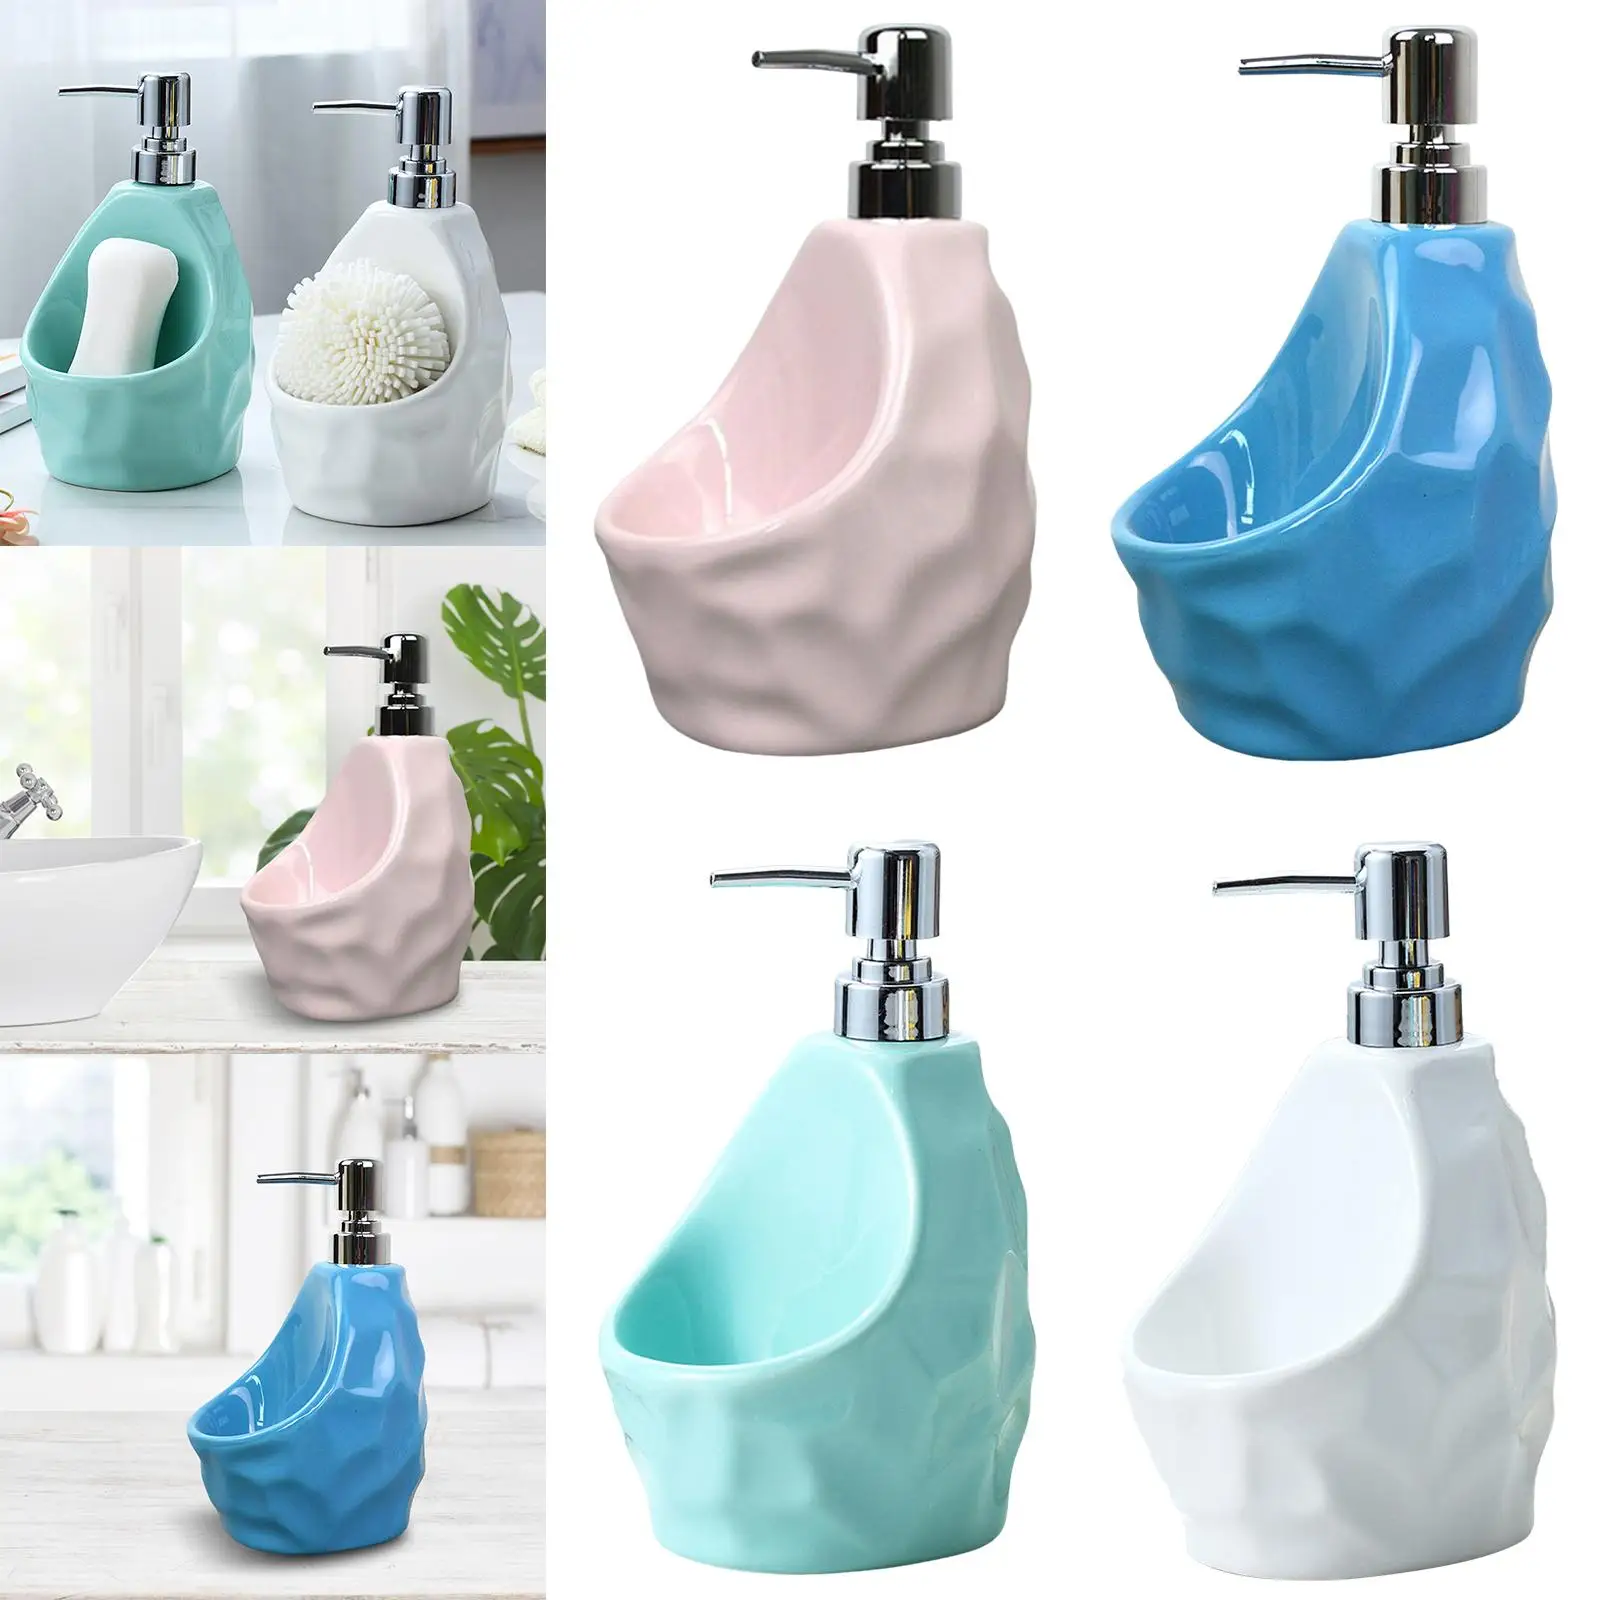 Soap Dispenser Lotion Dispensers Empty Modern Ceramic Container Holder for Body Wash Dish Soap Soap Sink Countertop Restroom